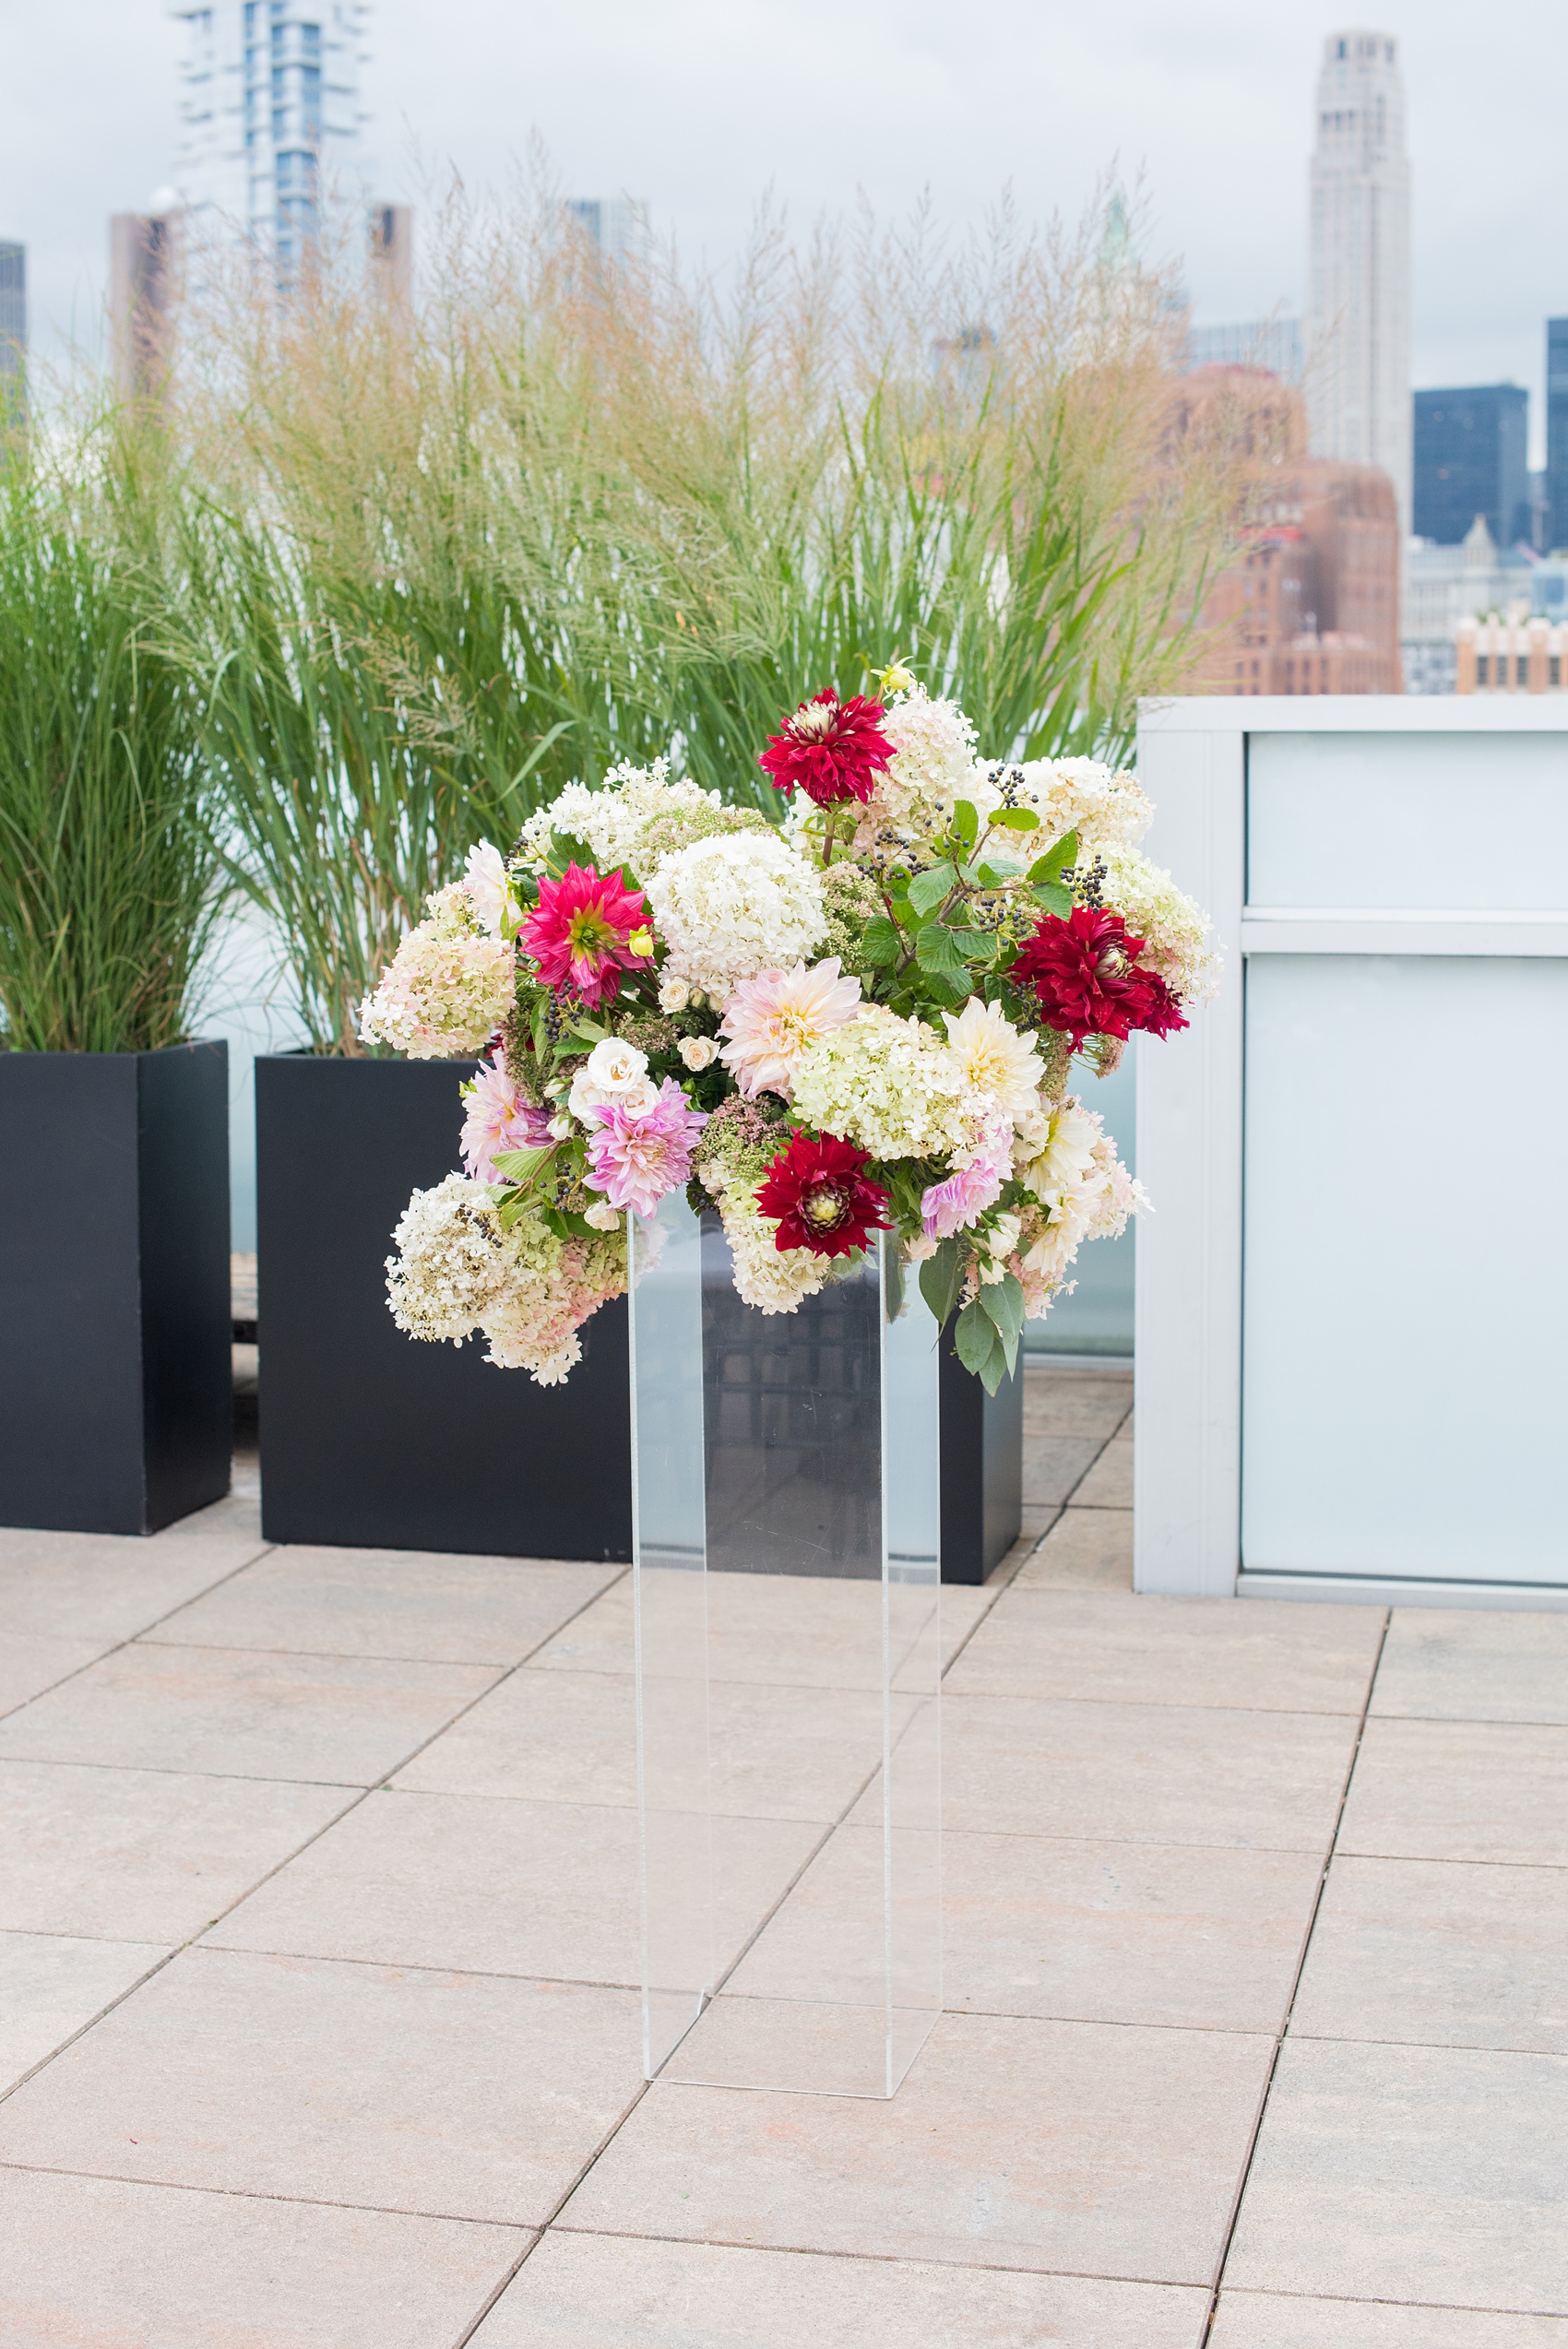 Photos of a NYC wedding venue, Tribeca Rooftop, by Mikkel Paige Photography. This ceremony and reception location has an outdoor space overlooking the Manhattan skyline. These pictures will provide inspiration in New York! Fall flowers were plentiful in bouquets and centerpieces, including red, purples, whites and pinks. Click through for more details from this celebration! #TribecaRooftop #MikkelPaige #NYCwedding #NYCWeddingVenues #NYCWeddingPhotography #FallFlowers #Ranunculus #Dahlias